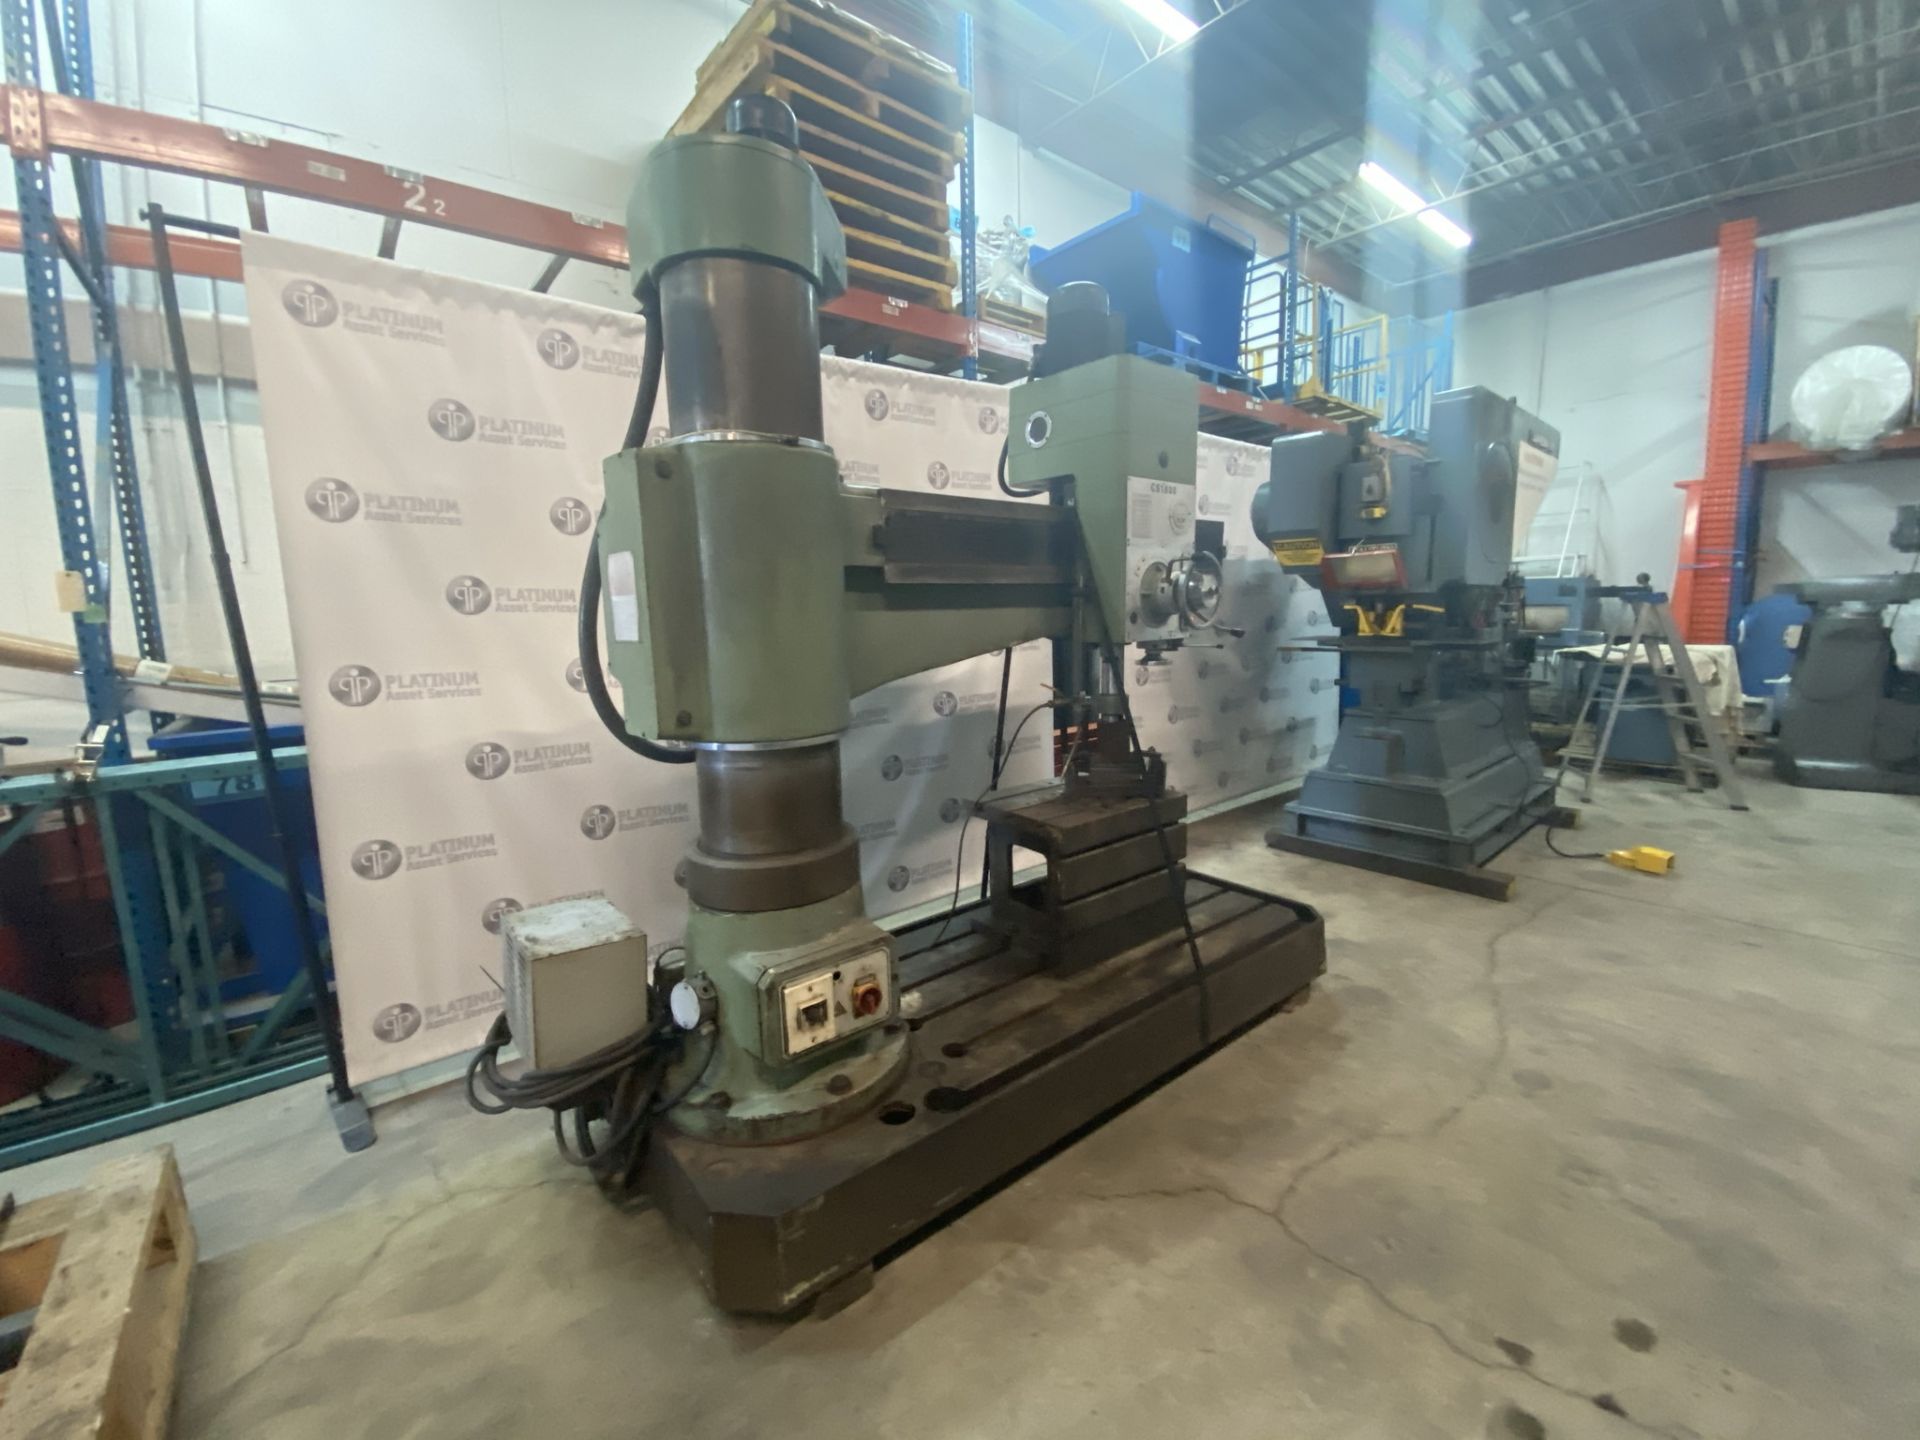 STANKO, CS1600, 60" RADIAL ARM DRILL WITH BOX TABLE - Image 2 of 10